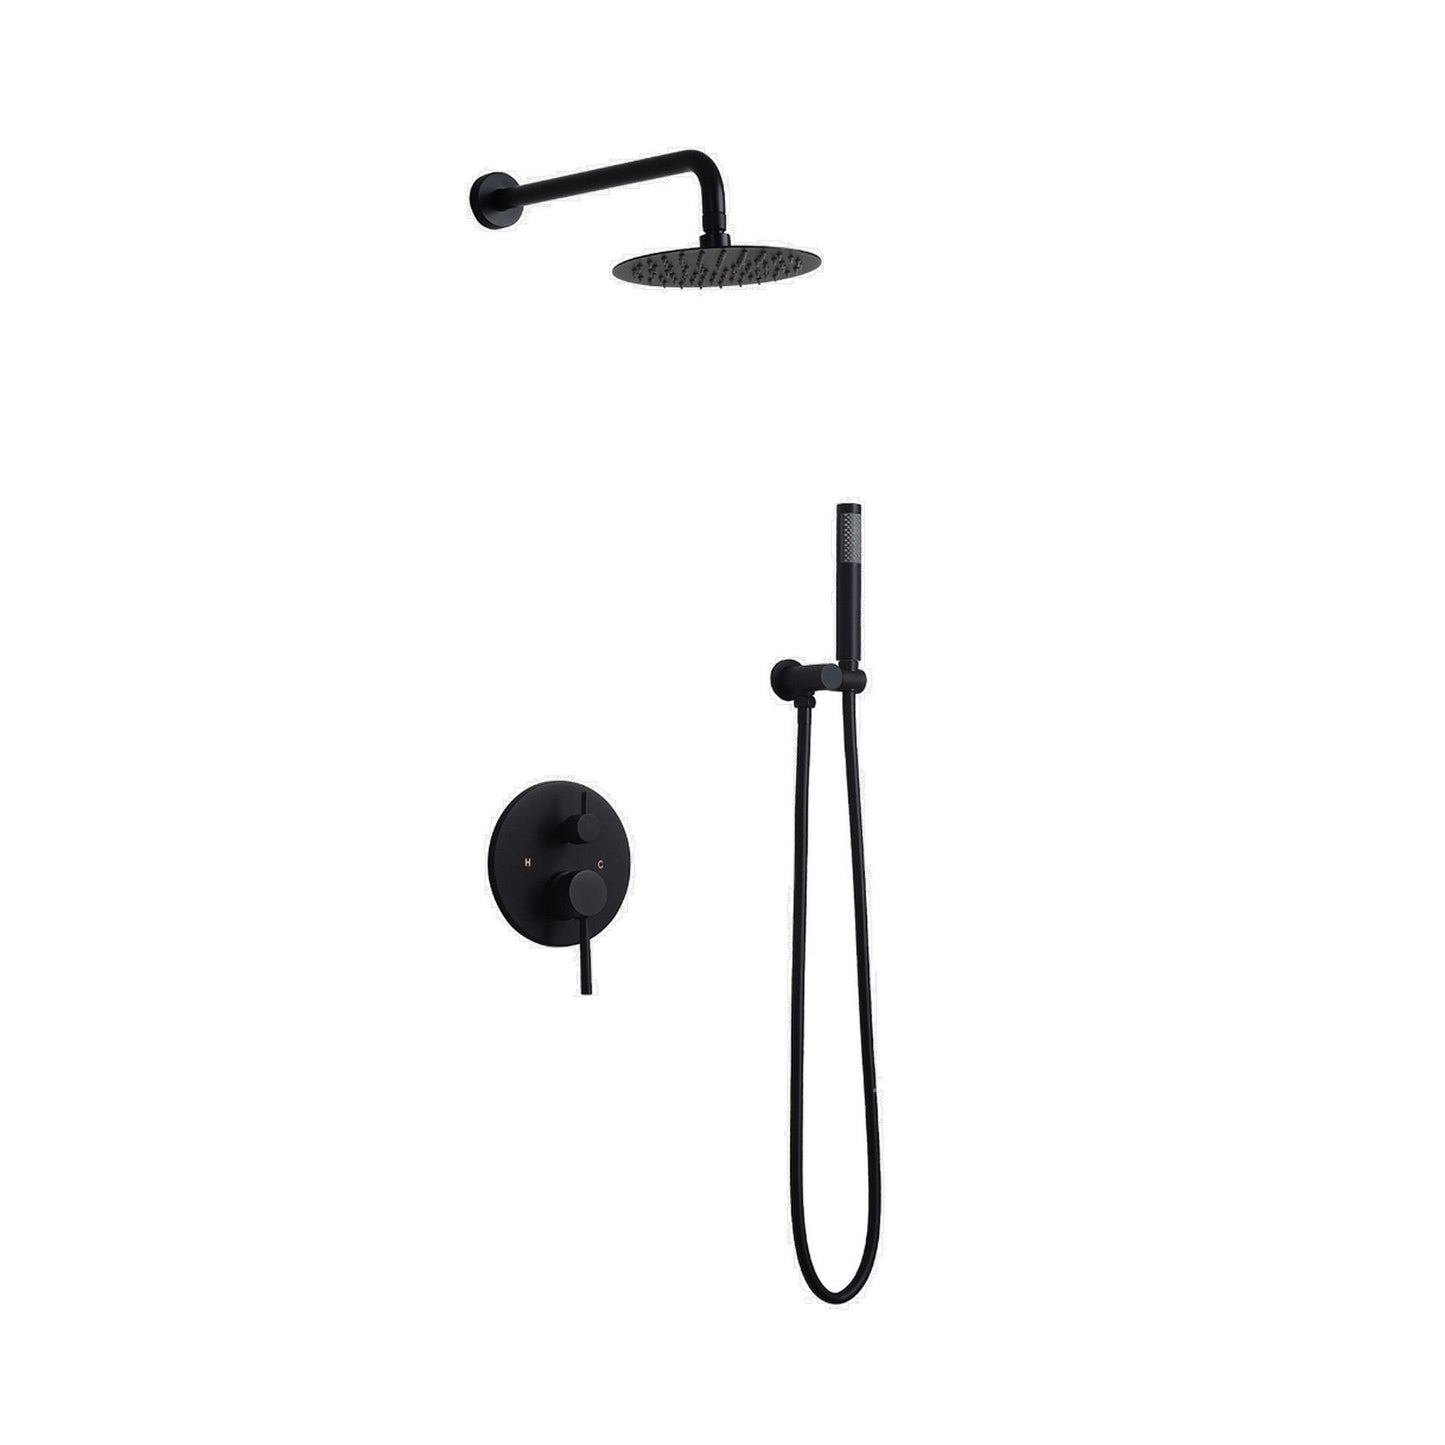 Ratel Matte Black Wall-Mounted Shower System With 10" Round Rainfall Shower Head and Handheld Shower